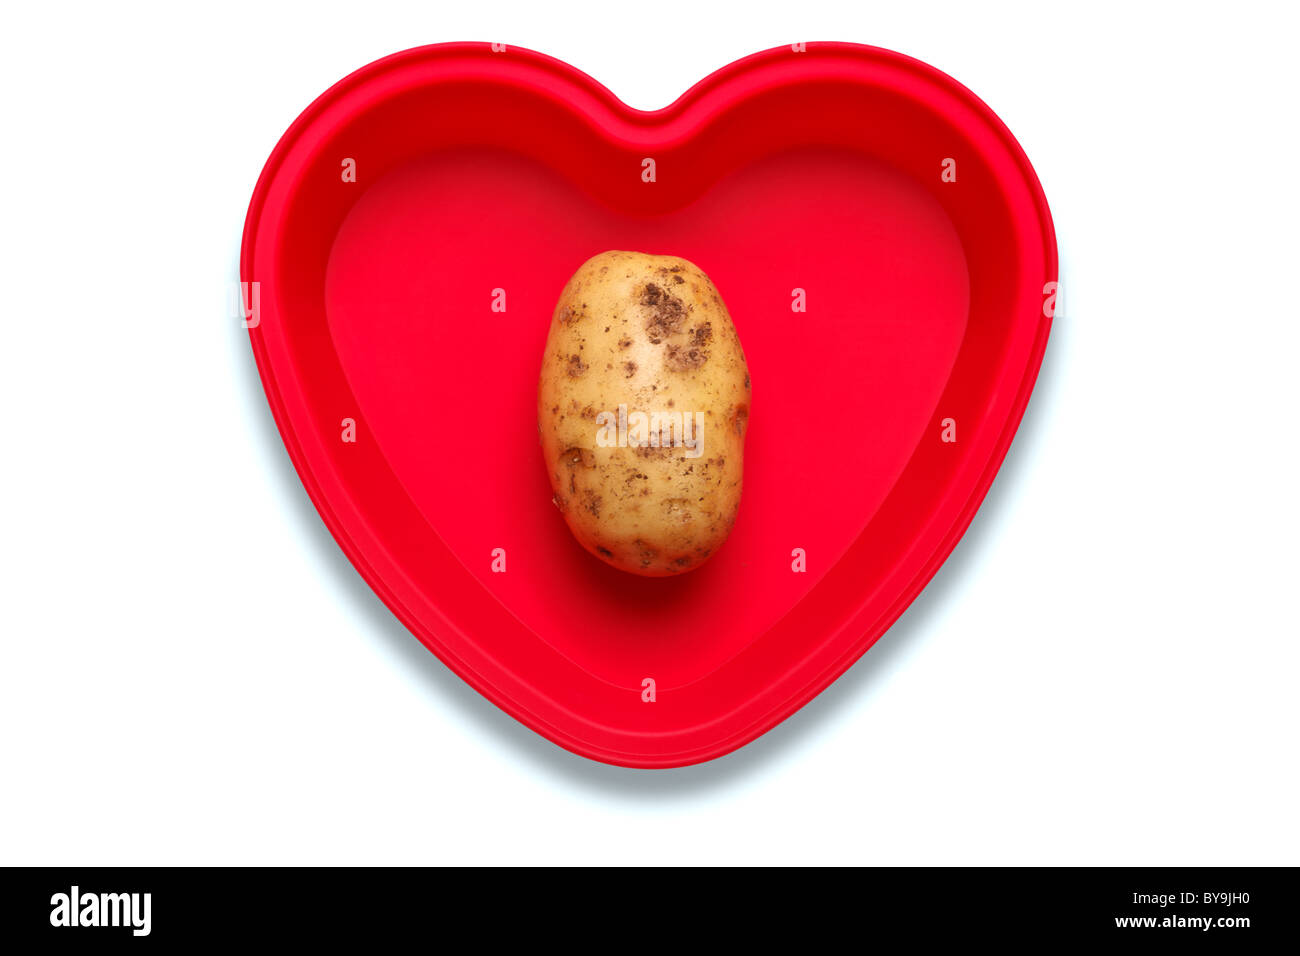 Conceptual photo of a potato in a heart shaped dish to represent a love of the vegetable, isolated on a white background Stock Photo